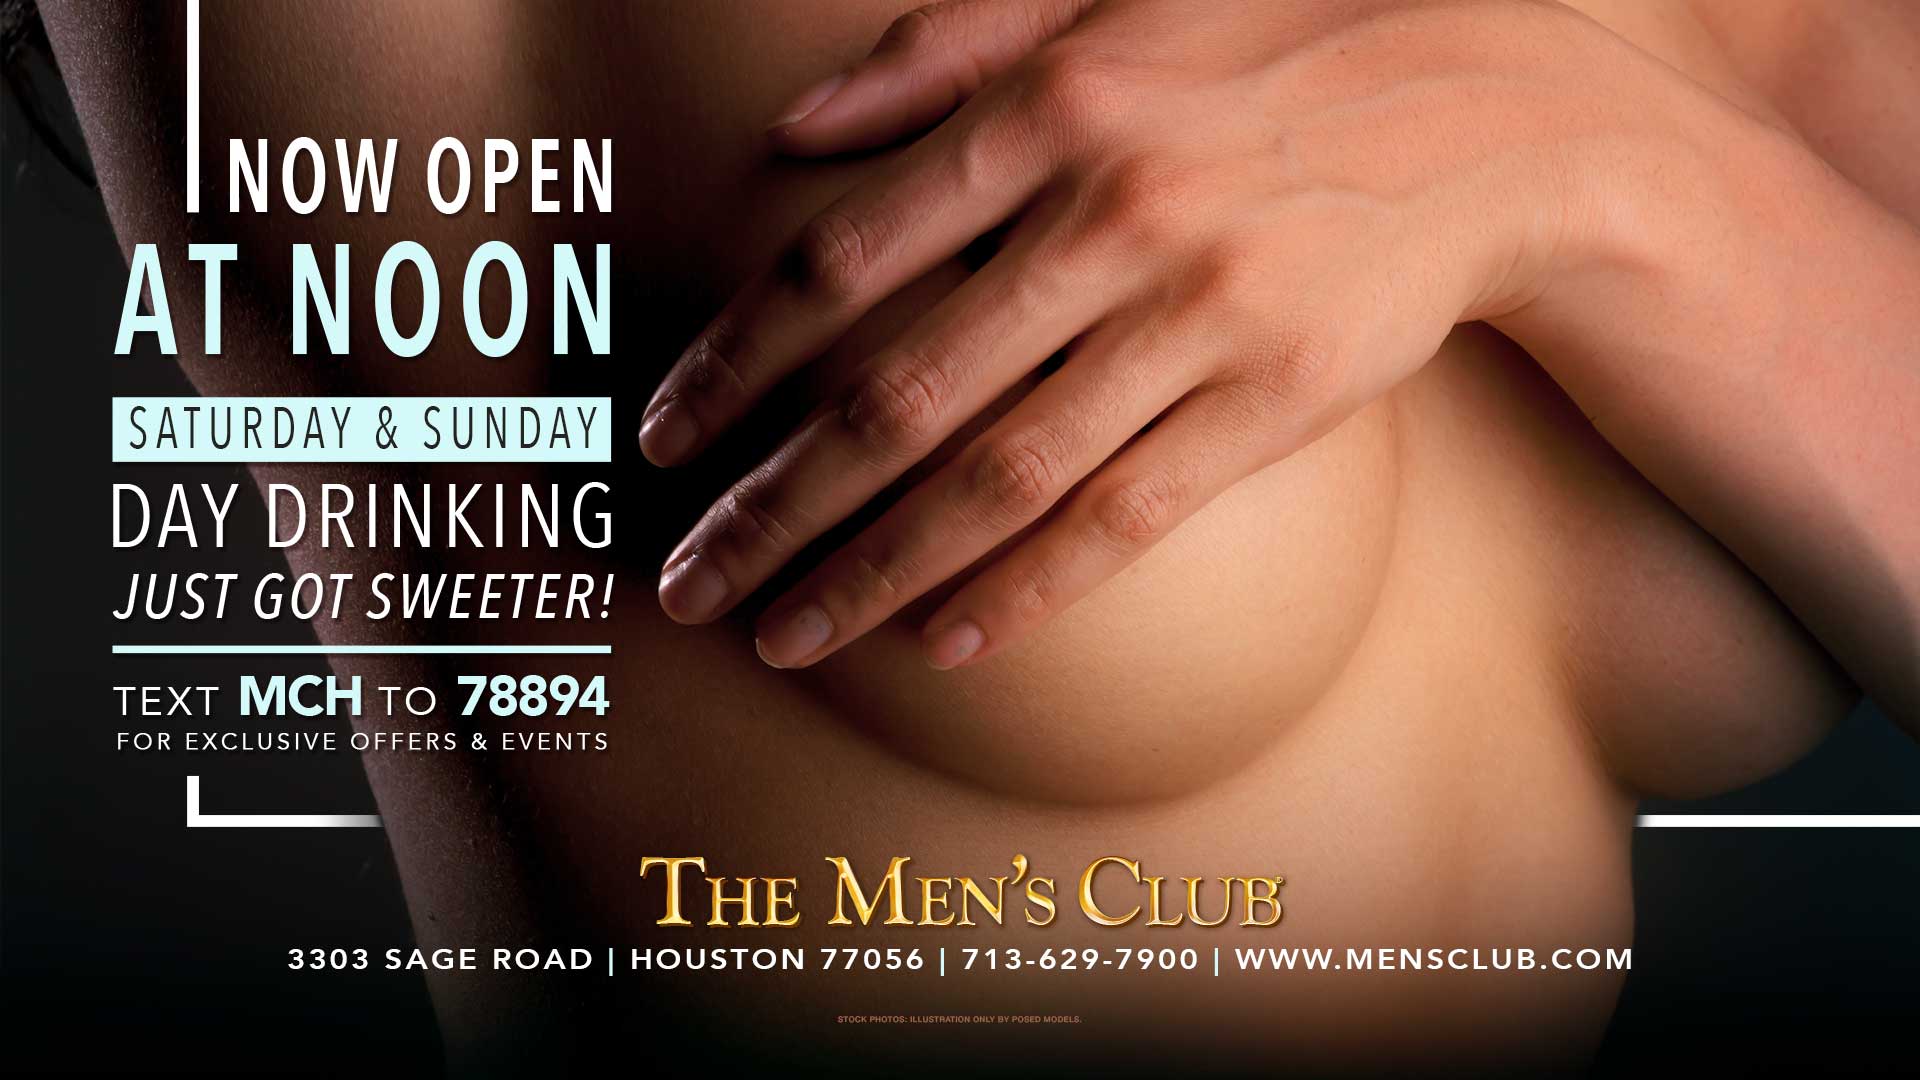 The Men's Club of Houston is now open at 12pm on Saturday and Sunday